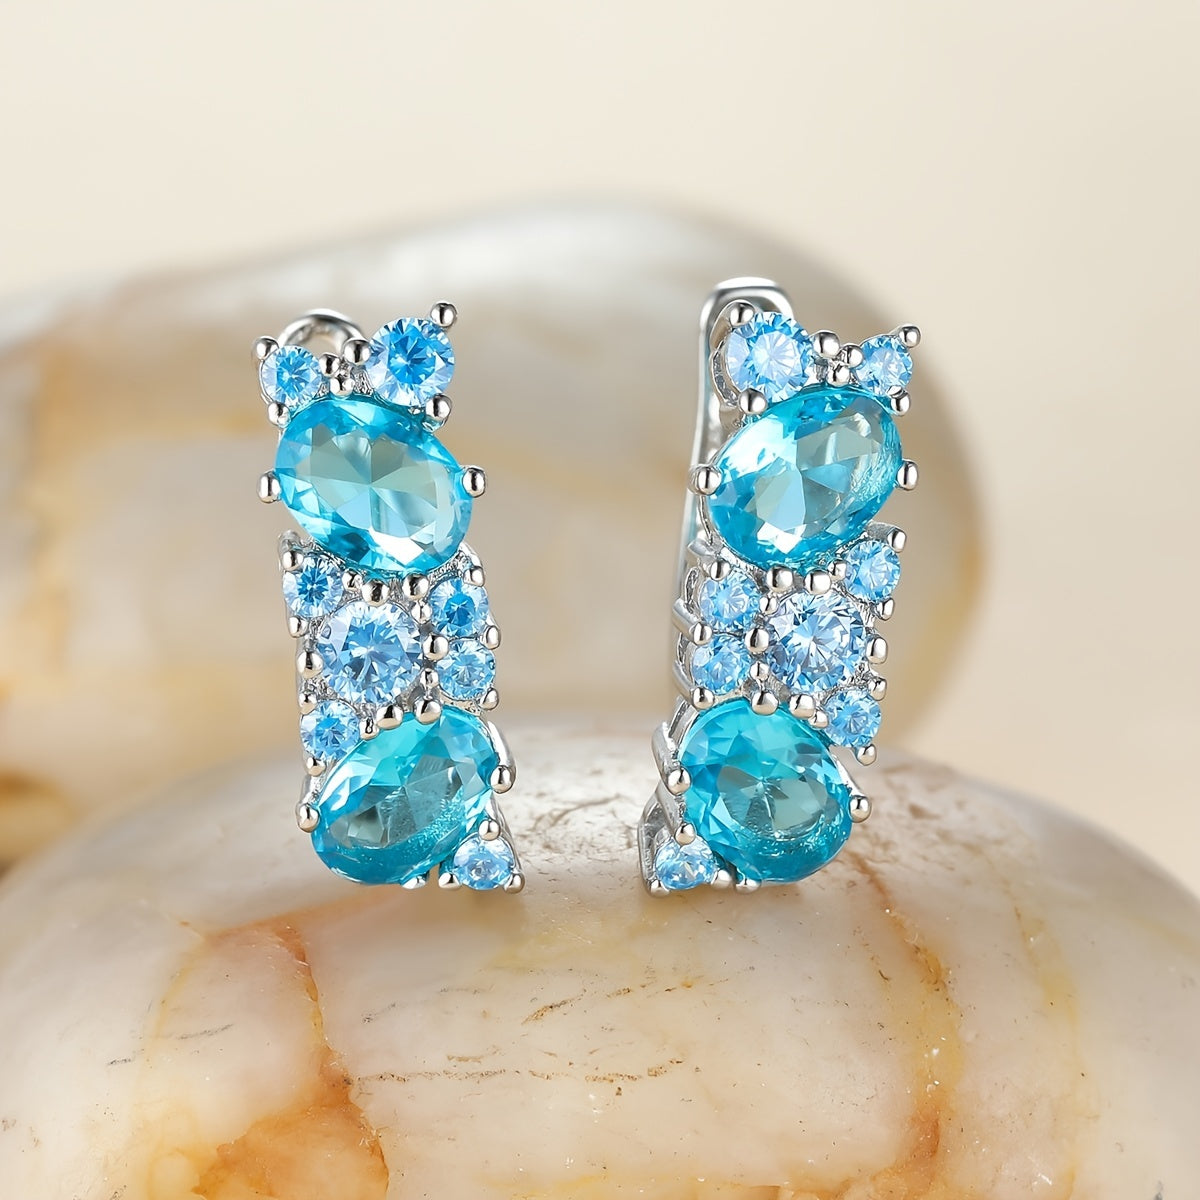 Gorgeous Silver Engagement Earrings with Luxurious Aqua Blue Zircon Stones - Perfect for Any Special Occasion!